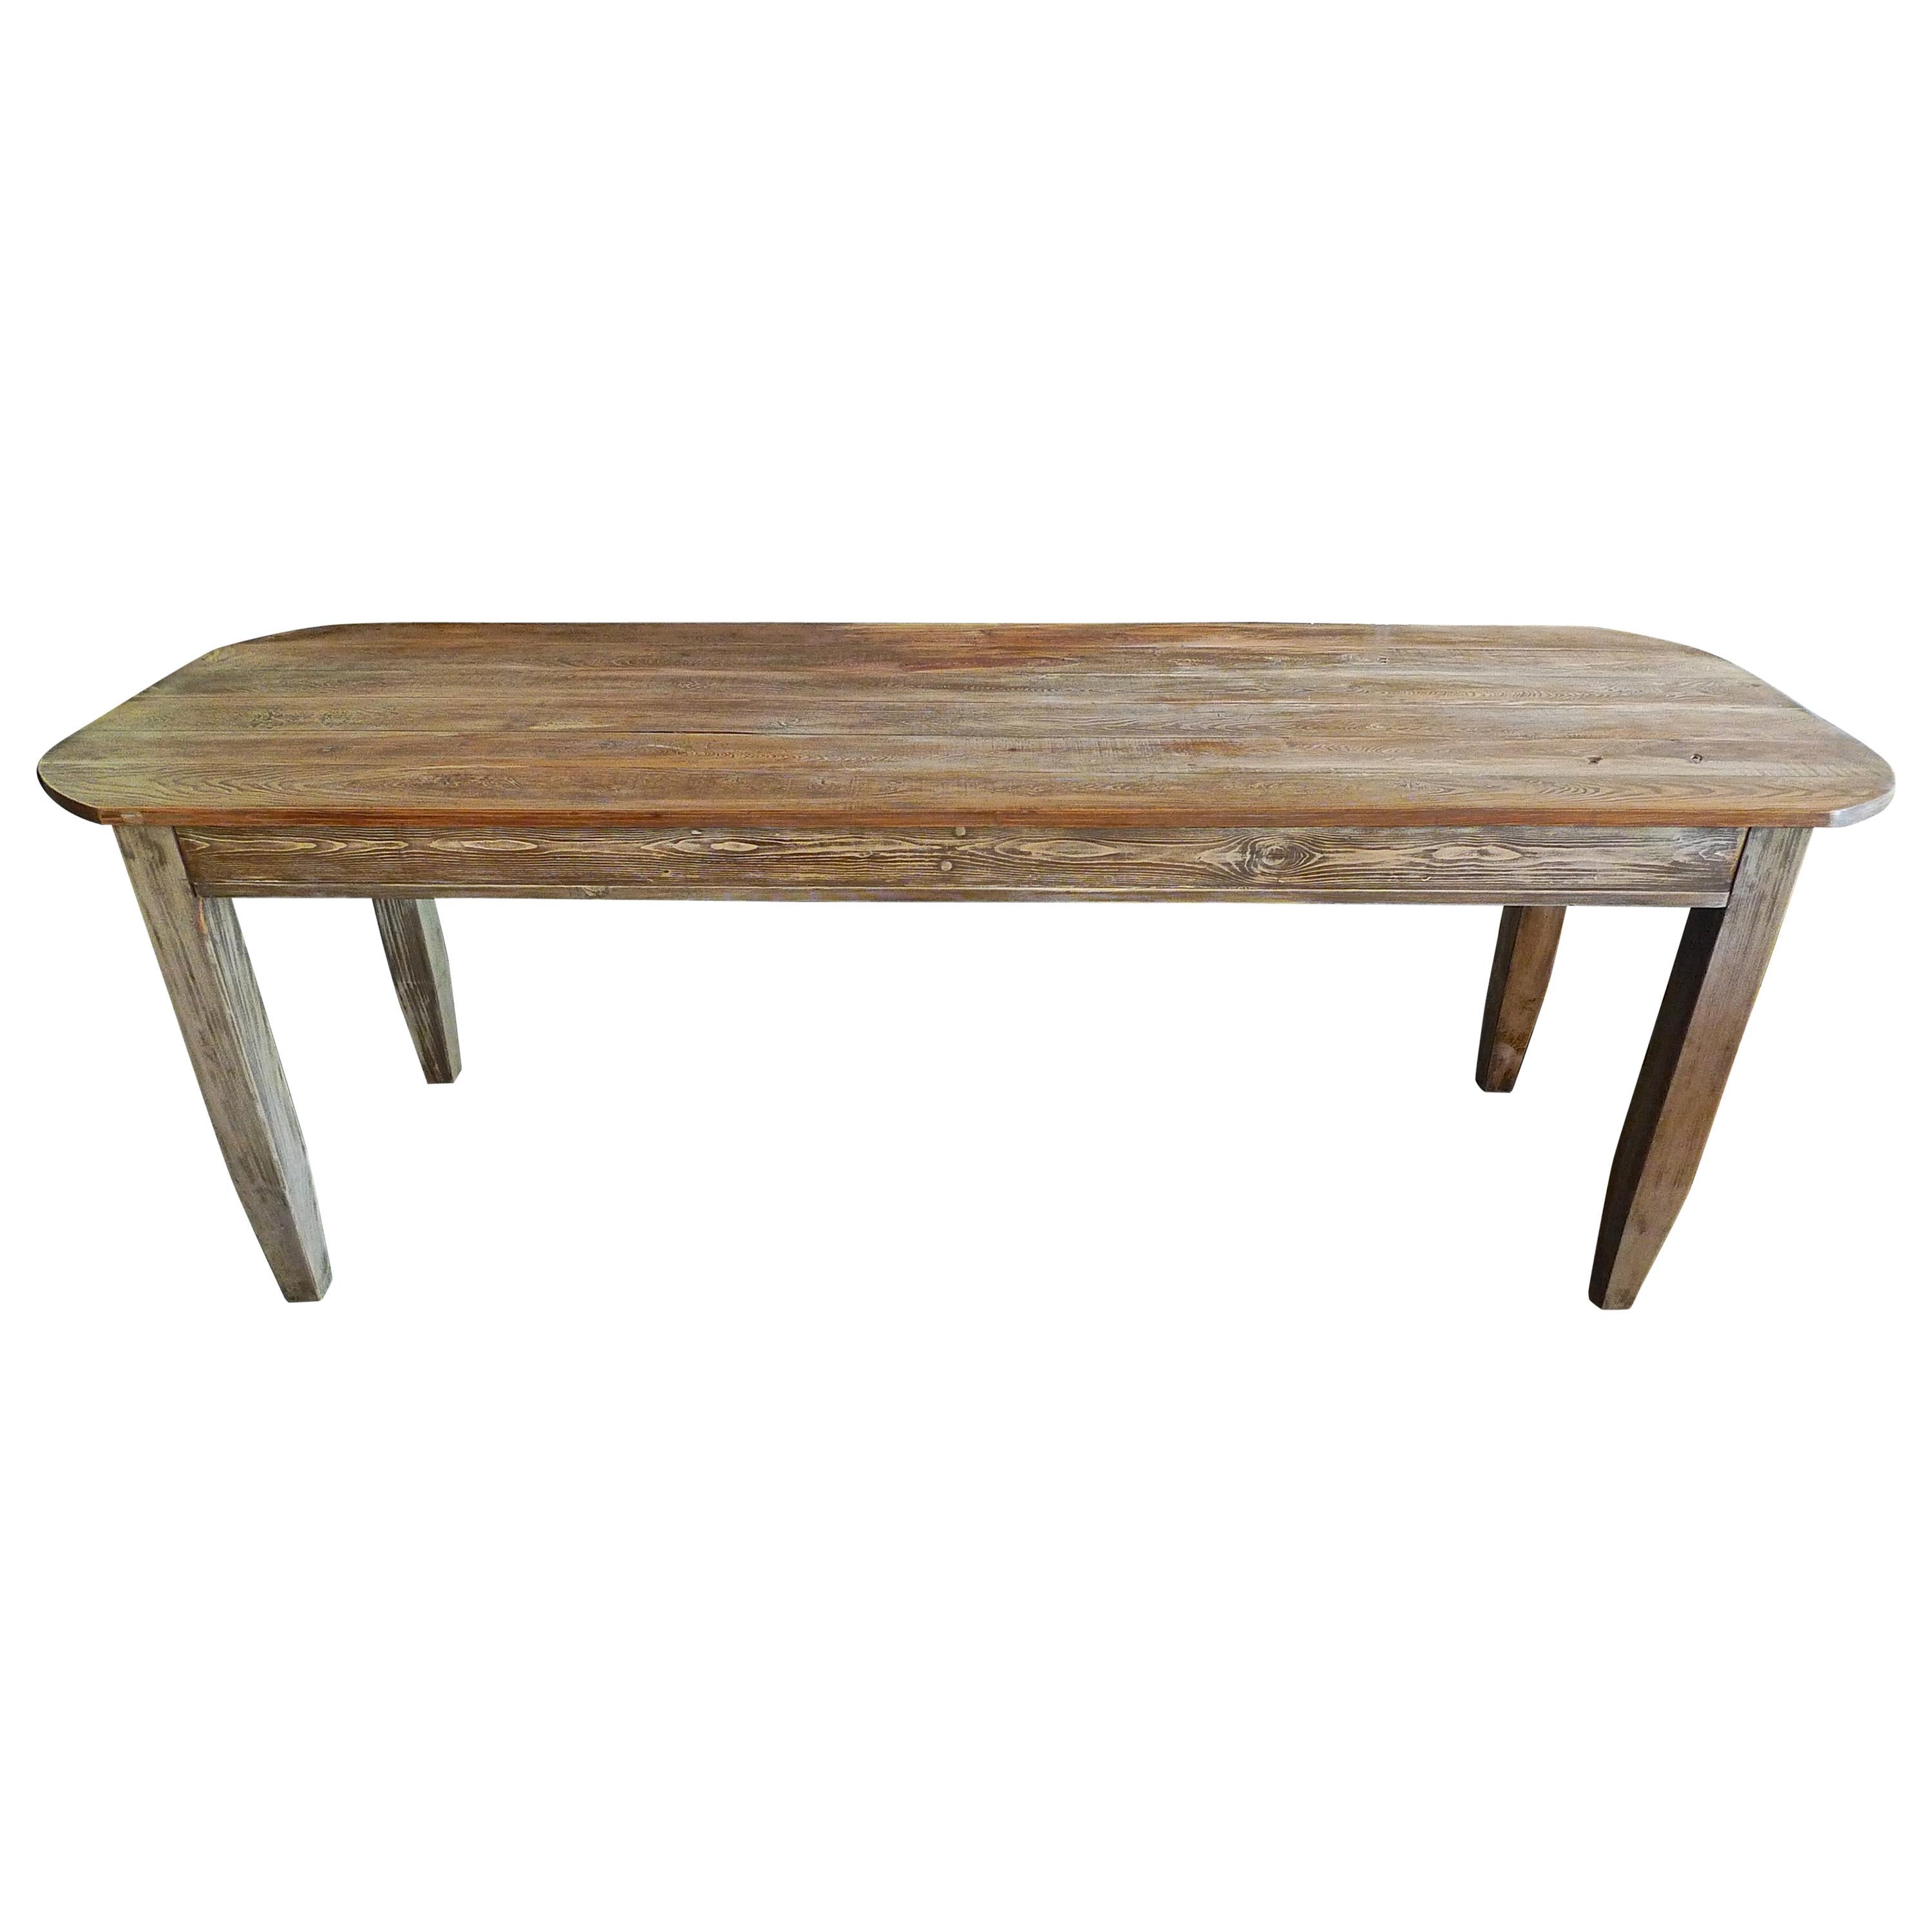 French 19th Century Pine Country Farmhouse Table.